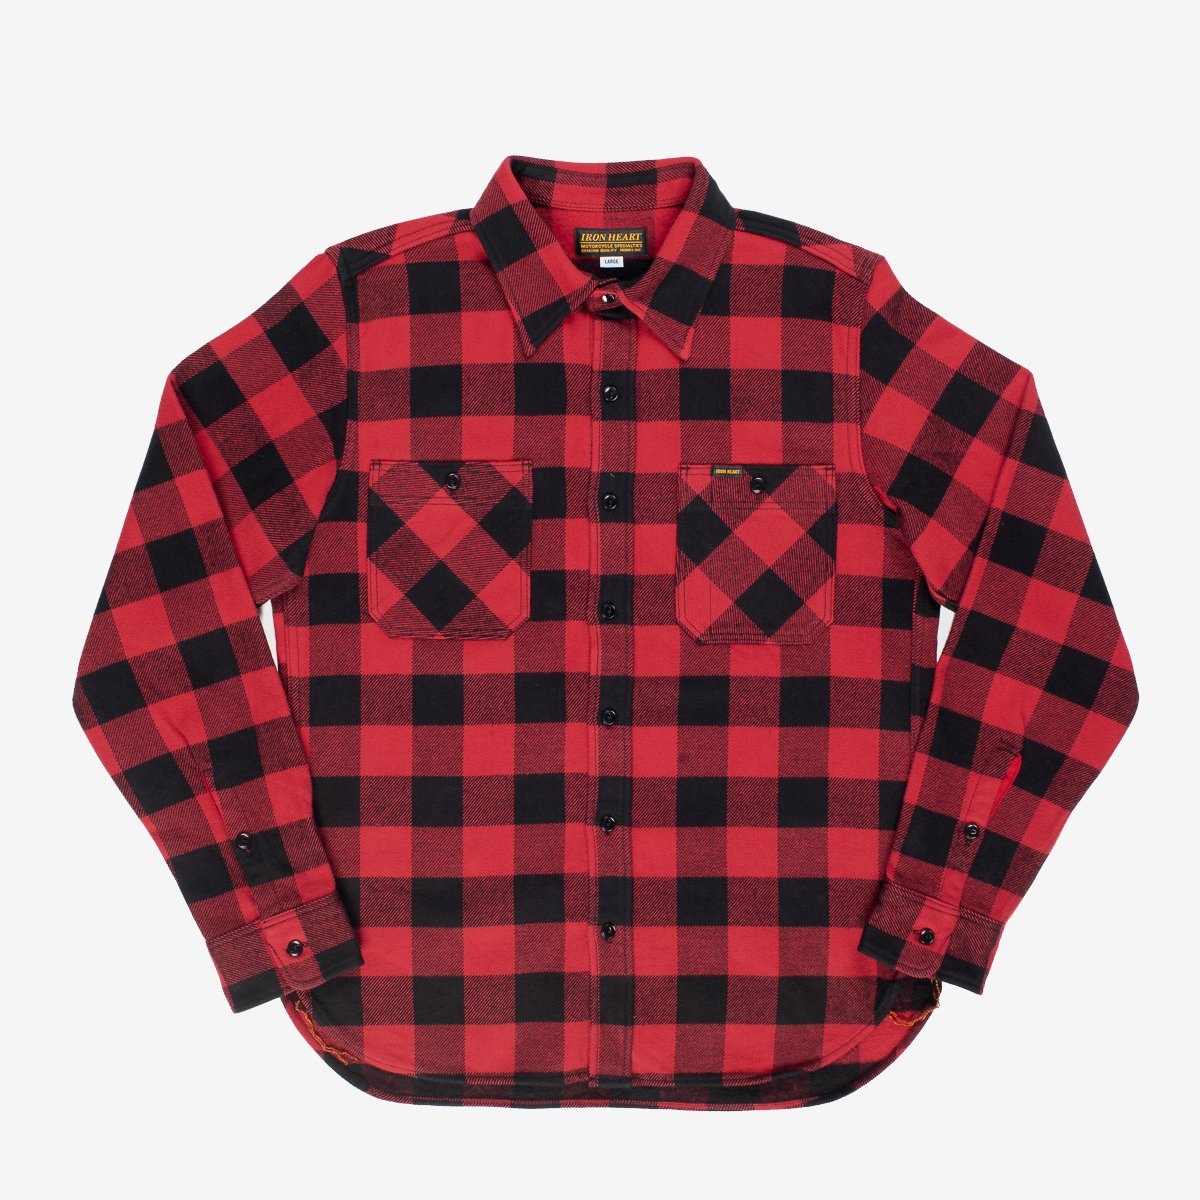 IHSH-244-RED Ultra Heavy Flannel Buffalo Check Work Shirt - Red/Black - 1